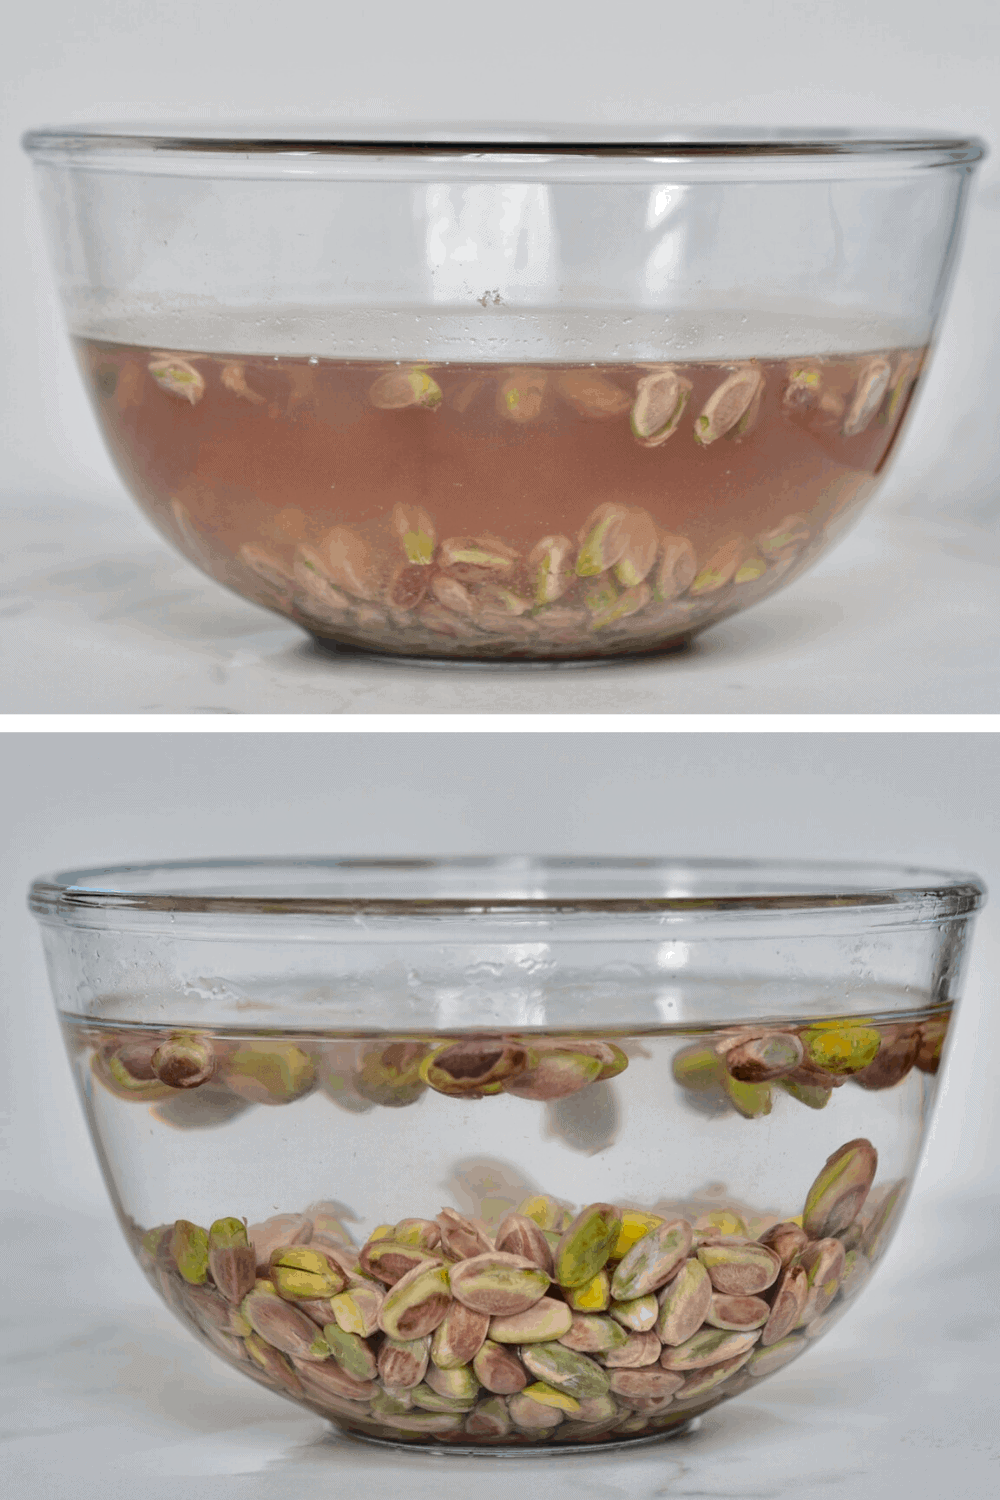 Soaked pistachios for dairy-free milk